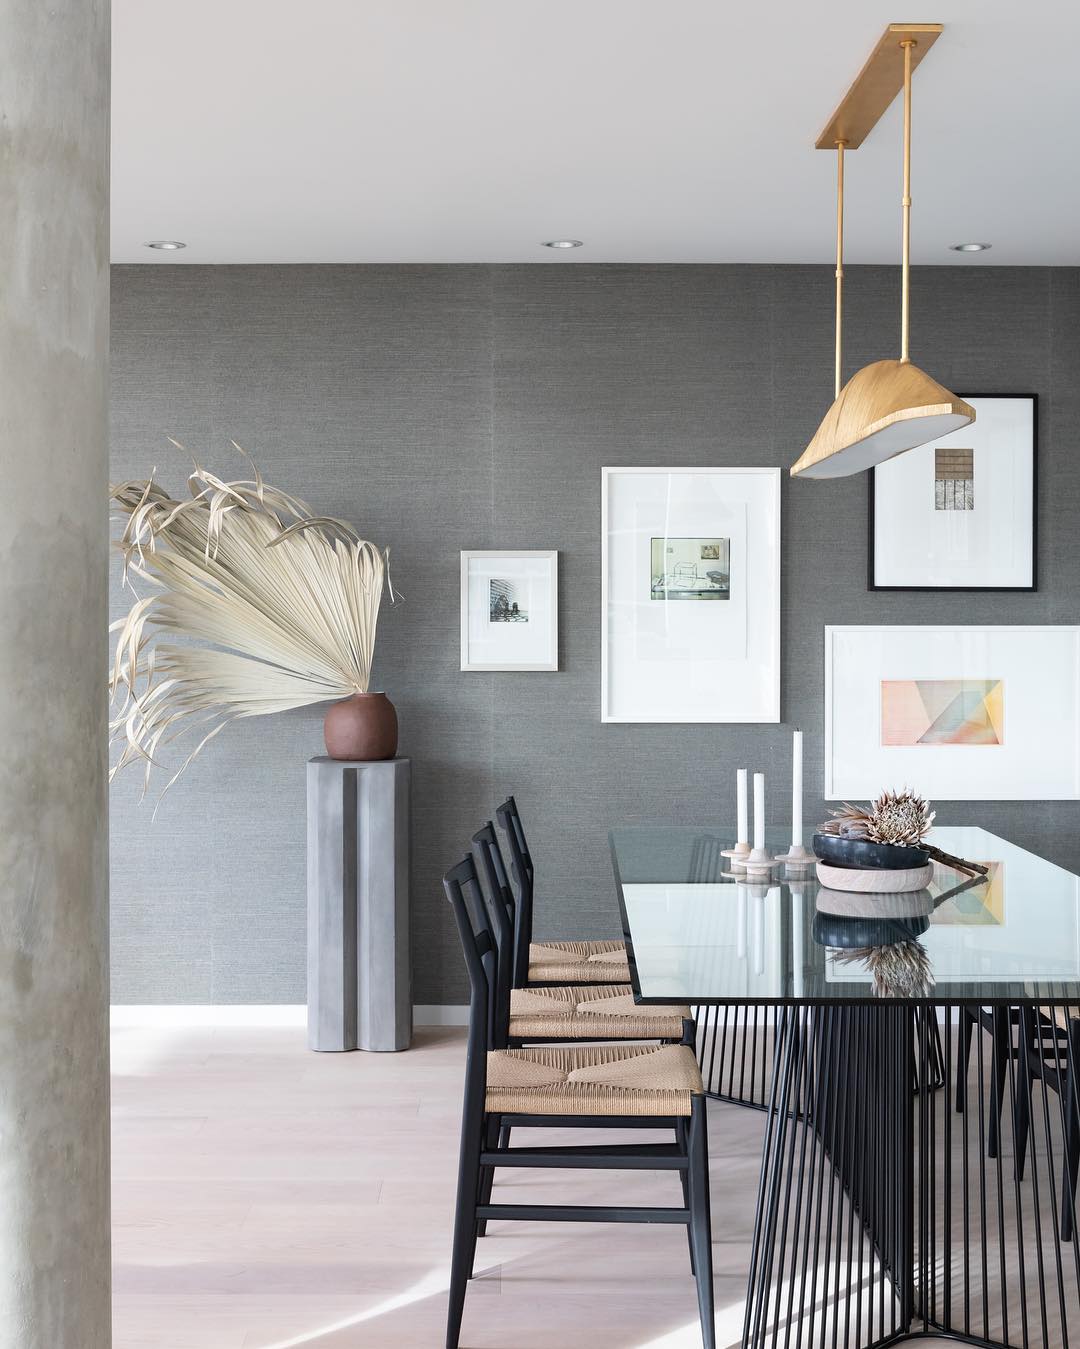 Modernly designed dining area with gray paint and gallery wall